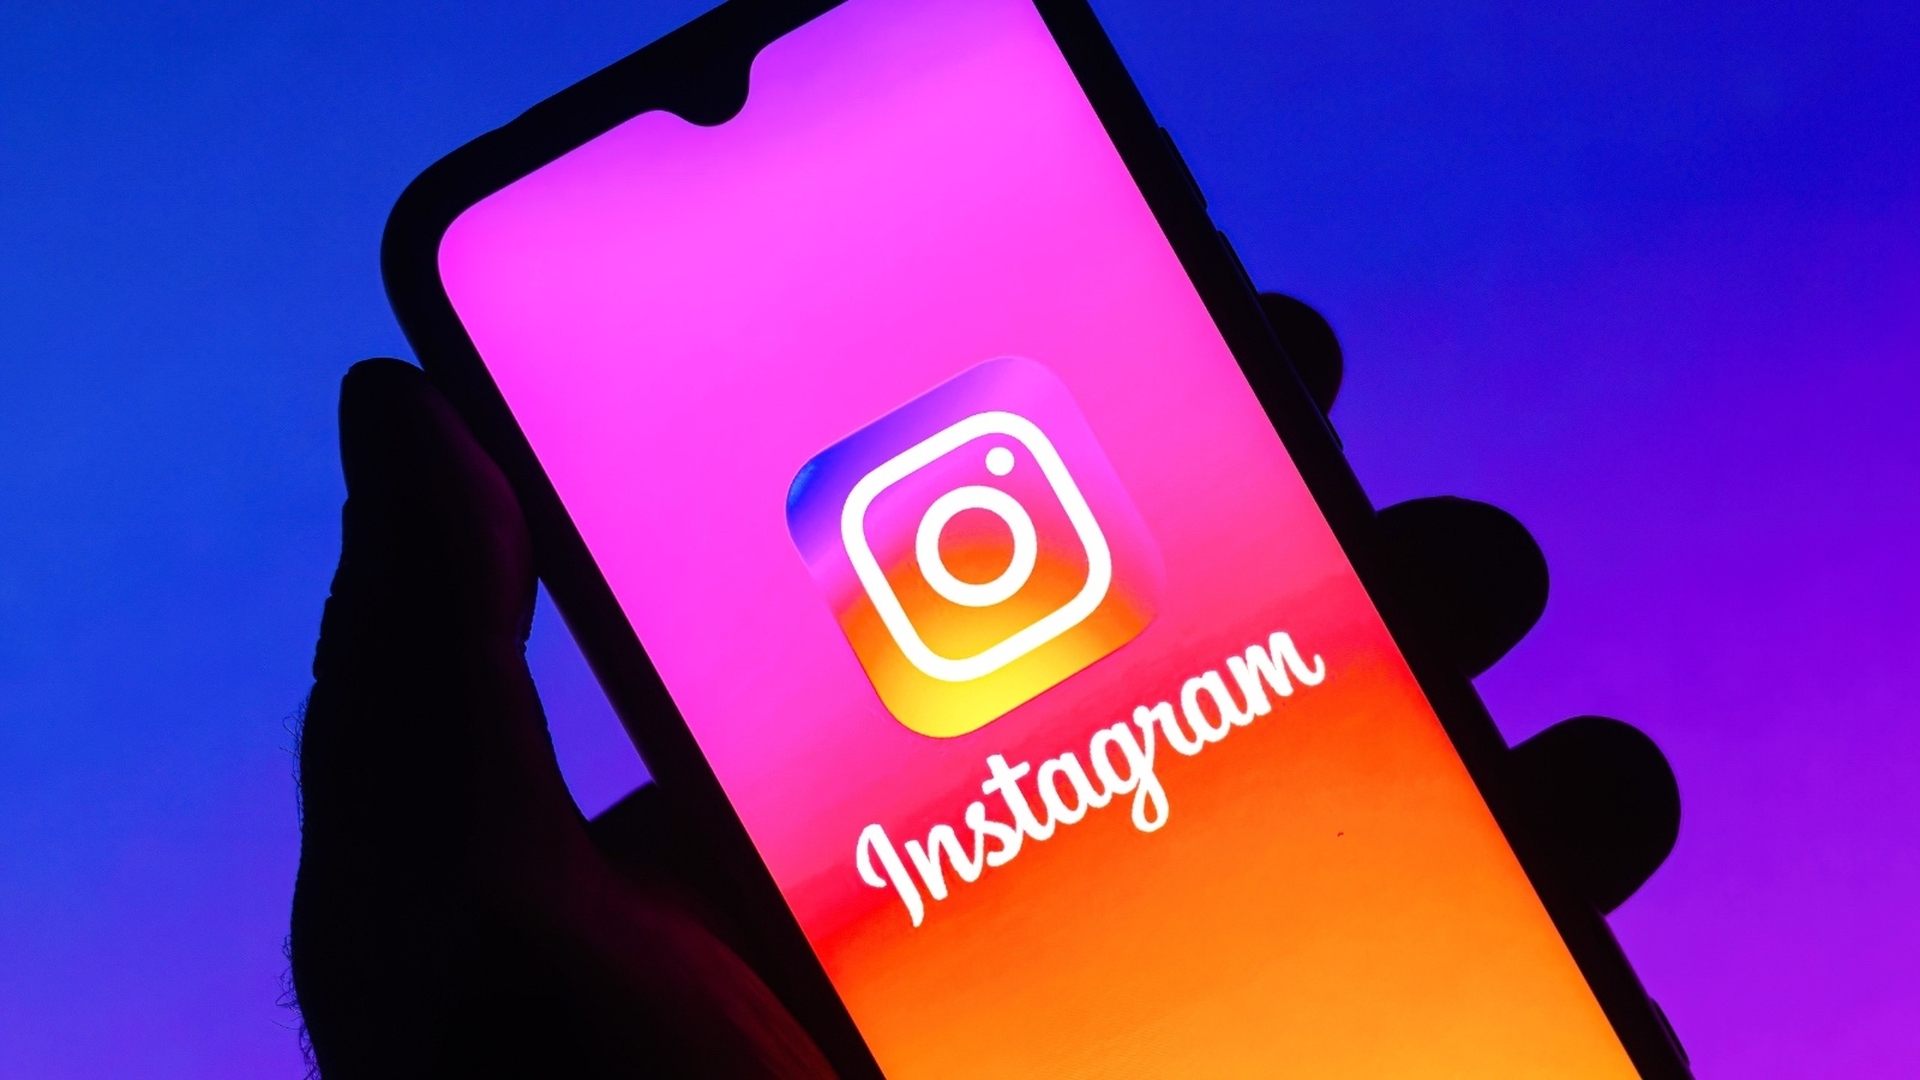 In this article, we are going to go over what is pin post to profile on Instagram and how to pin post to profile Instagram, so you can utilize this latest feature.